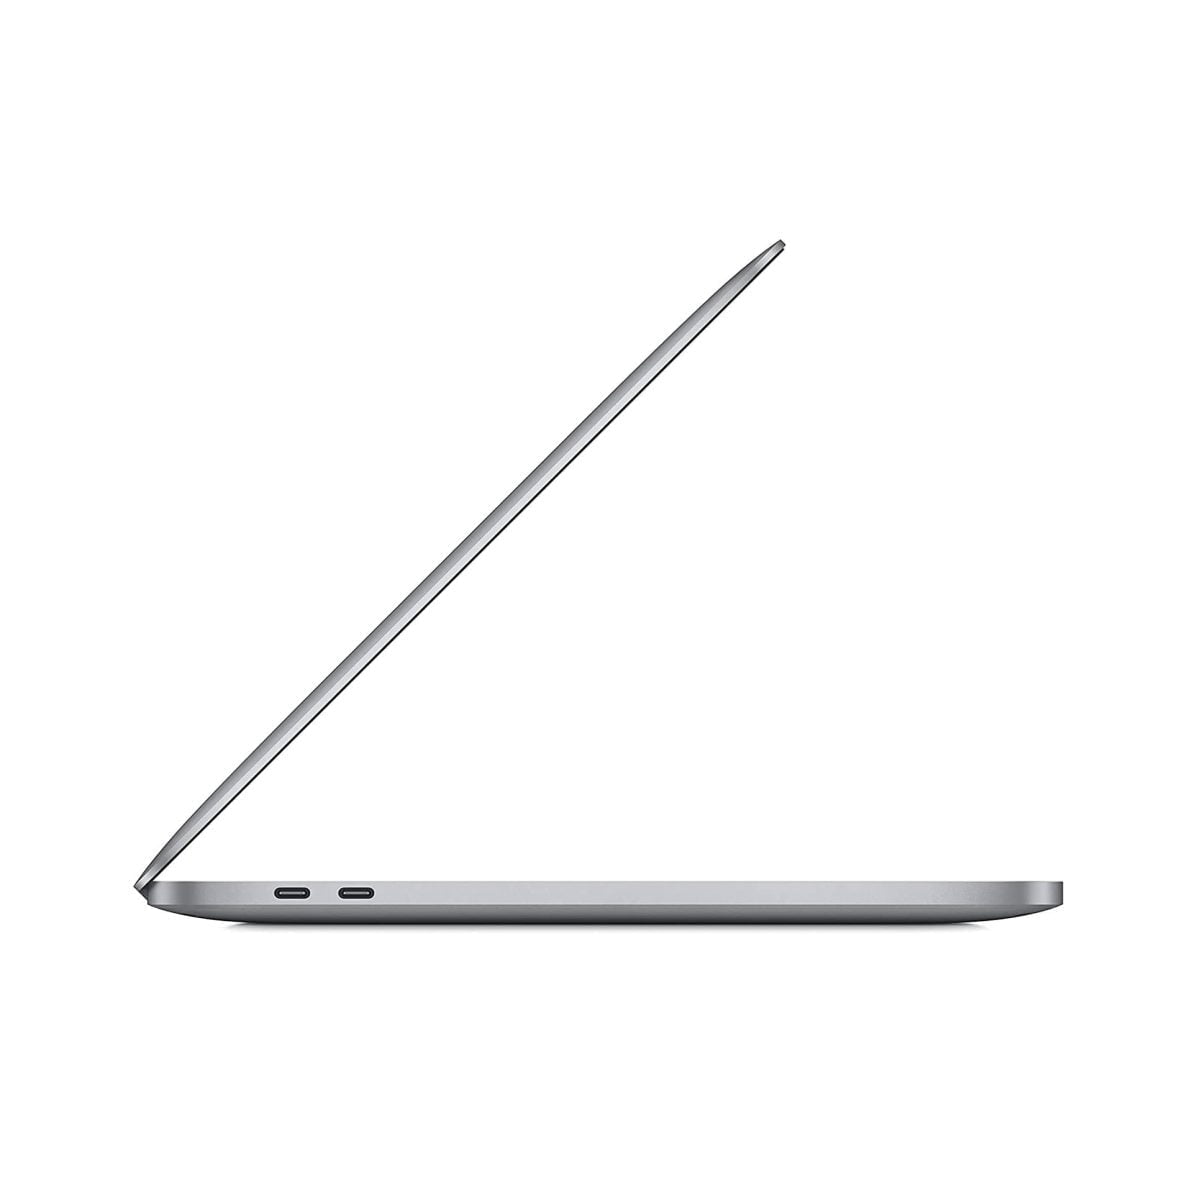 51Tkwdlcmis. Ac Sl1500 Apple &Lt;H1 Id=&Quot;Title&Quot; Class=&Quot;A-Size-Large A-Spacing-None&Quot;&Gt;Macbook Pro 13.3&Quot; Laptop - Apple M1 Chip - 8Gb Memory - 256Gb Ssd (Latest Model) - Space Gray(English Keyboard)&Lt;/H1&Gt; &Lt;P Class=&Quot;Heading-5 V-Fw-Regular Description-Heading&Quot;&Gt;&Lt;Span Style=&Quot;Color: #333333;Font-Size: 16Px&Quot;&Gt;The Apple M1 Chip Redefines The 13-Inch Macbook Pro. Featuring An 8-Core Cpu That Flies Through Complex Workflows In Photography, Coding, Video Editing, And More. Incredible 8-Core Gpu That Crushes Graphics-Intensive Tasks And Enables Super-Smooth Gaming. An Advanced 16-Core Neural Engine For More Machine Learning Power In Your Favorite Apps. Superfast Unified Memory For Fluid Performance. And The Longest-Ever Battery Life In A Mac At Up To 20 Hours.² It’s Apple'S Most Popular Pro Notebook. Way More Performance And Way More Pro.&Lt;/Span&Gt;&Lt;/P&Gt; Macbook Pro 13 Macbook Pro 13&Quot; Laptop - Apple M1 Chip - 8Gb Memory - 256Gb Ssd (Myd82) - Space Gray